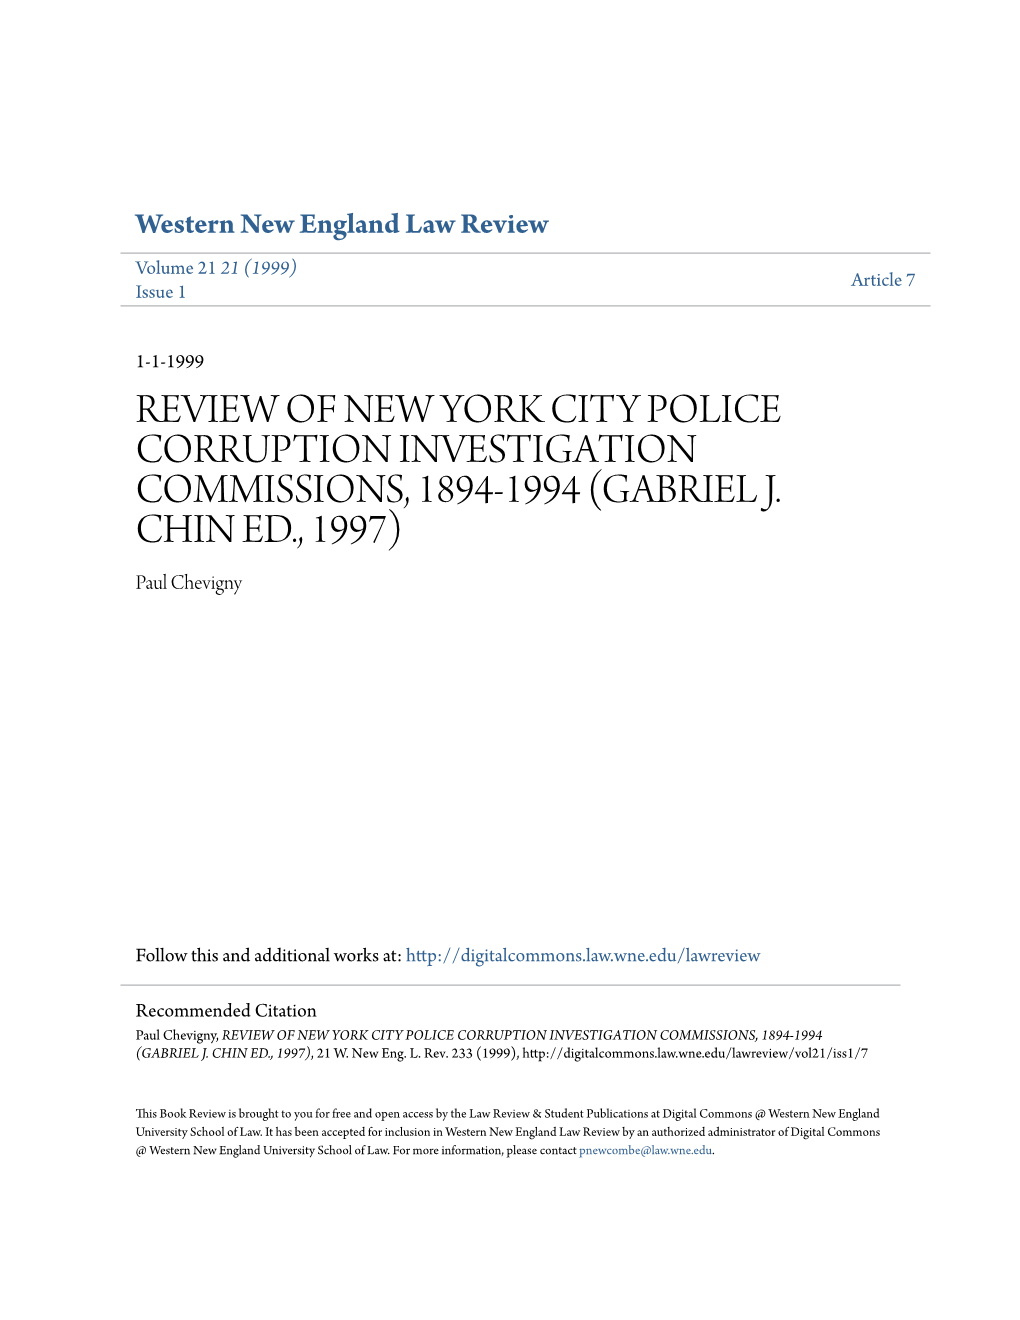 Review of New York City Police Corruption Investigation Commissions, 1894-1994 (Gabriel J